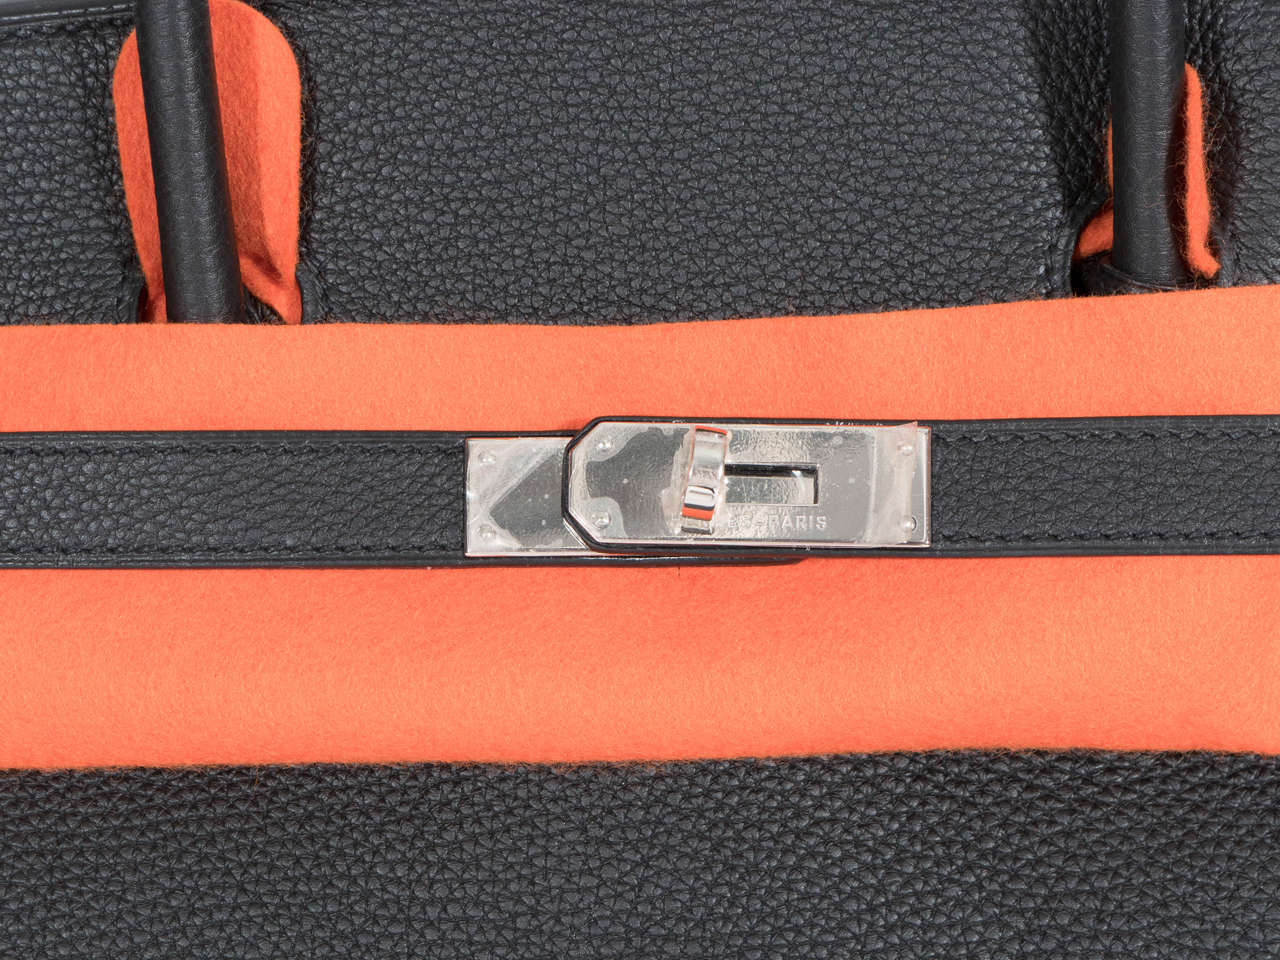 Hermès Paris Birkin Bag 40 in Togo Leather with Palladium Hardware, 2008 In Excellent Condition For Sale In New York, NY